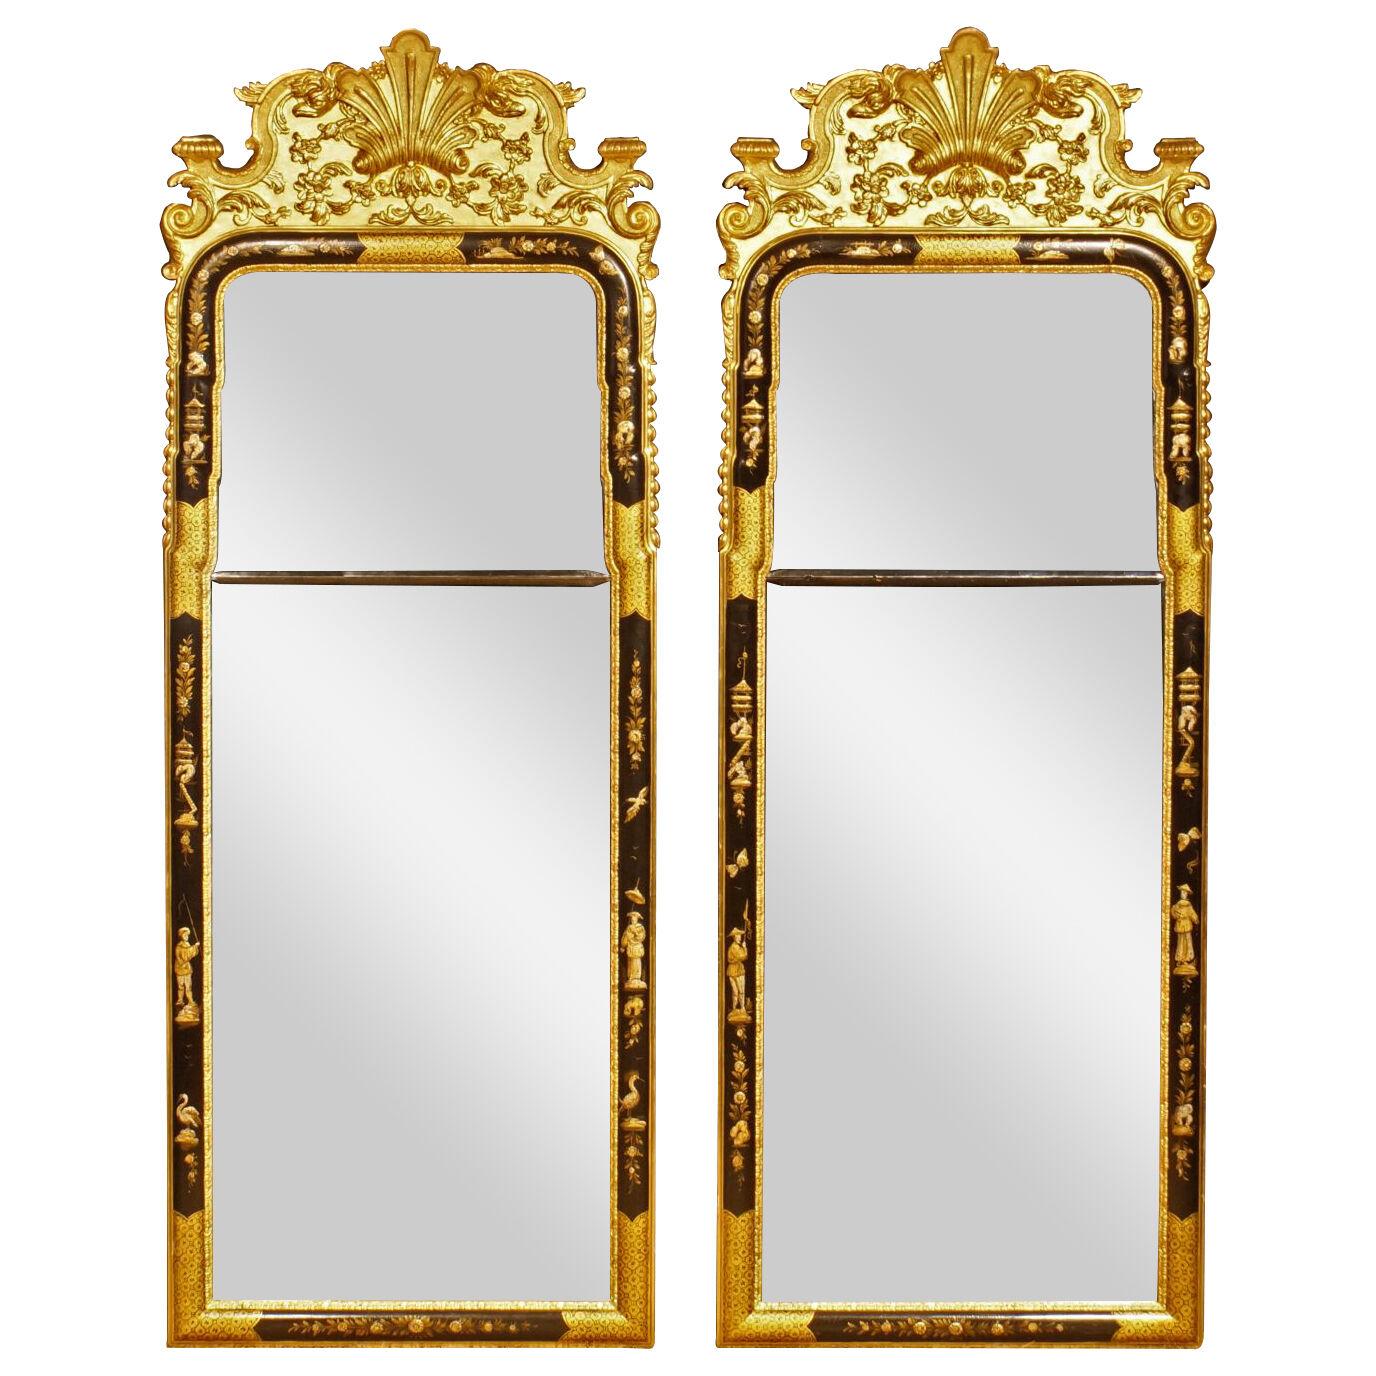 Pair of Early 20th Century Chinoiserie Framed Mirrors in the Queen Anne Style